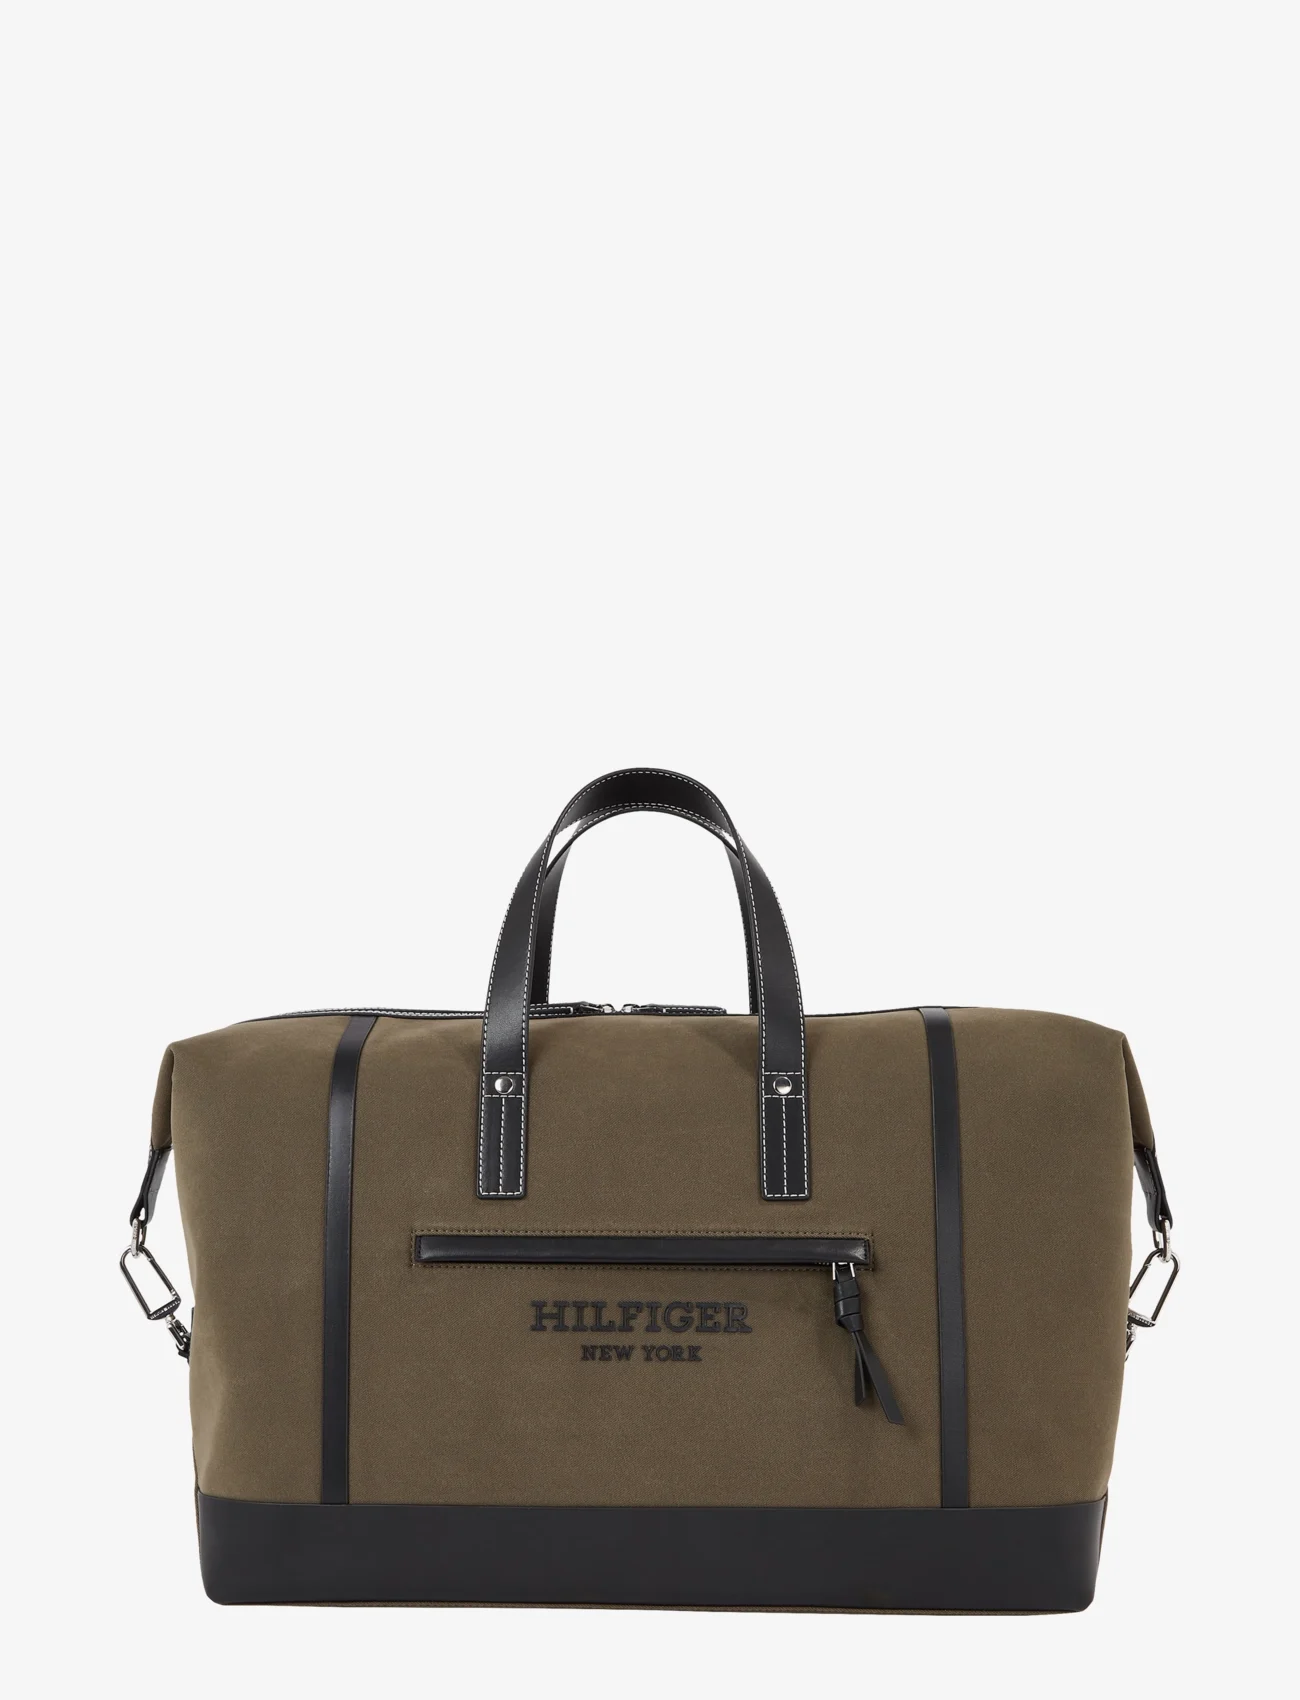 Tommy Hilfiger - TH PREP CLASSIC DUFFLE - weekender - olive - 0